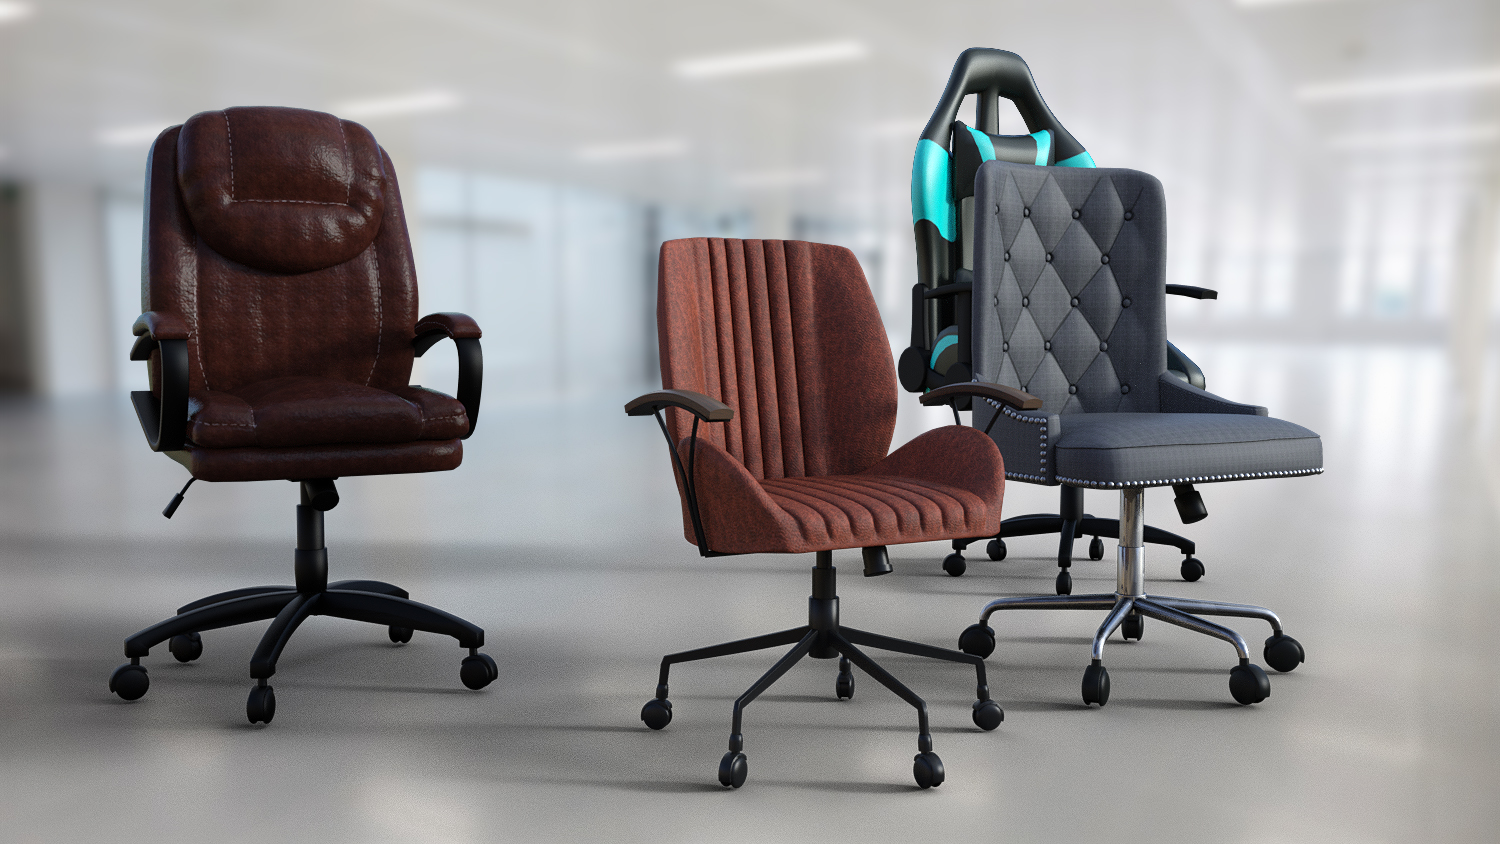 Generations Of Chairs by: PerspectX, 3D Models by Daz 3D